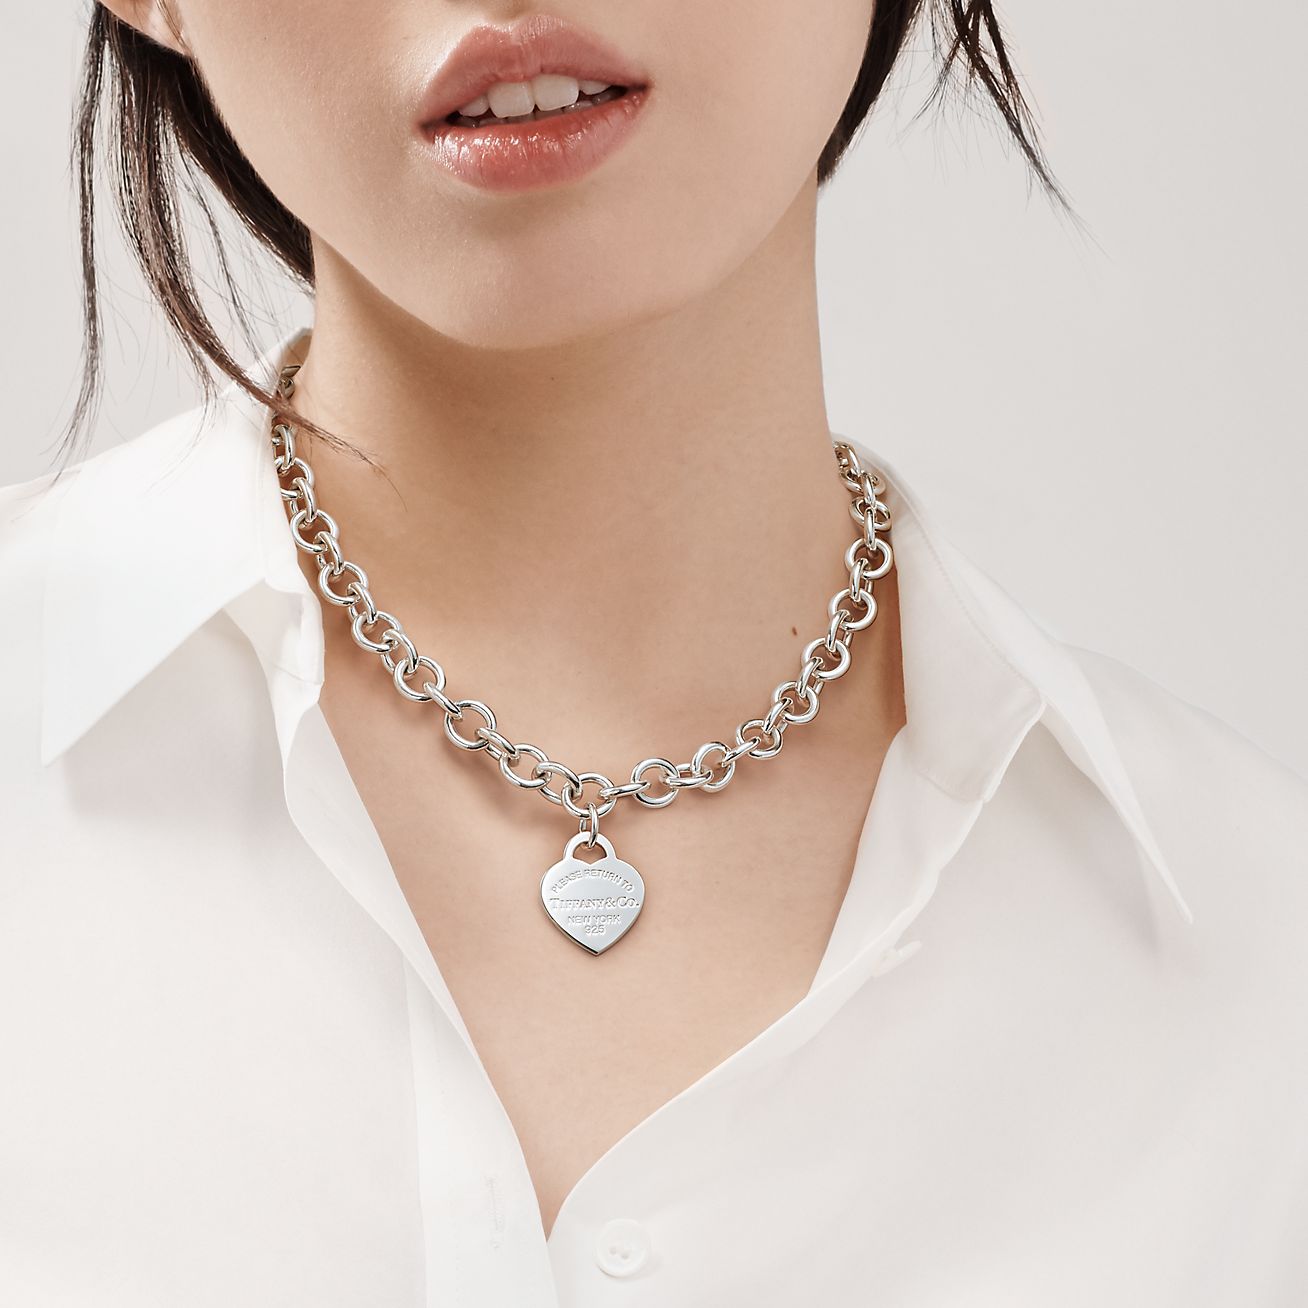 tiffanyanynecklace Pendant Necklaces Classic S925 Original Design Heart Necklace Women Silver Fashion Necklace Jewelry Chains for Necklaces Lover Gift